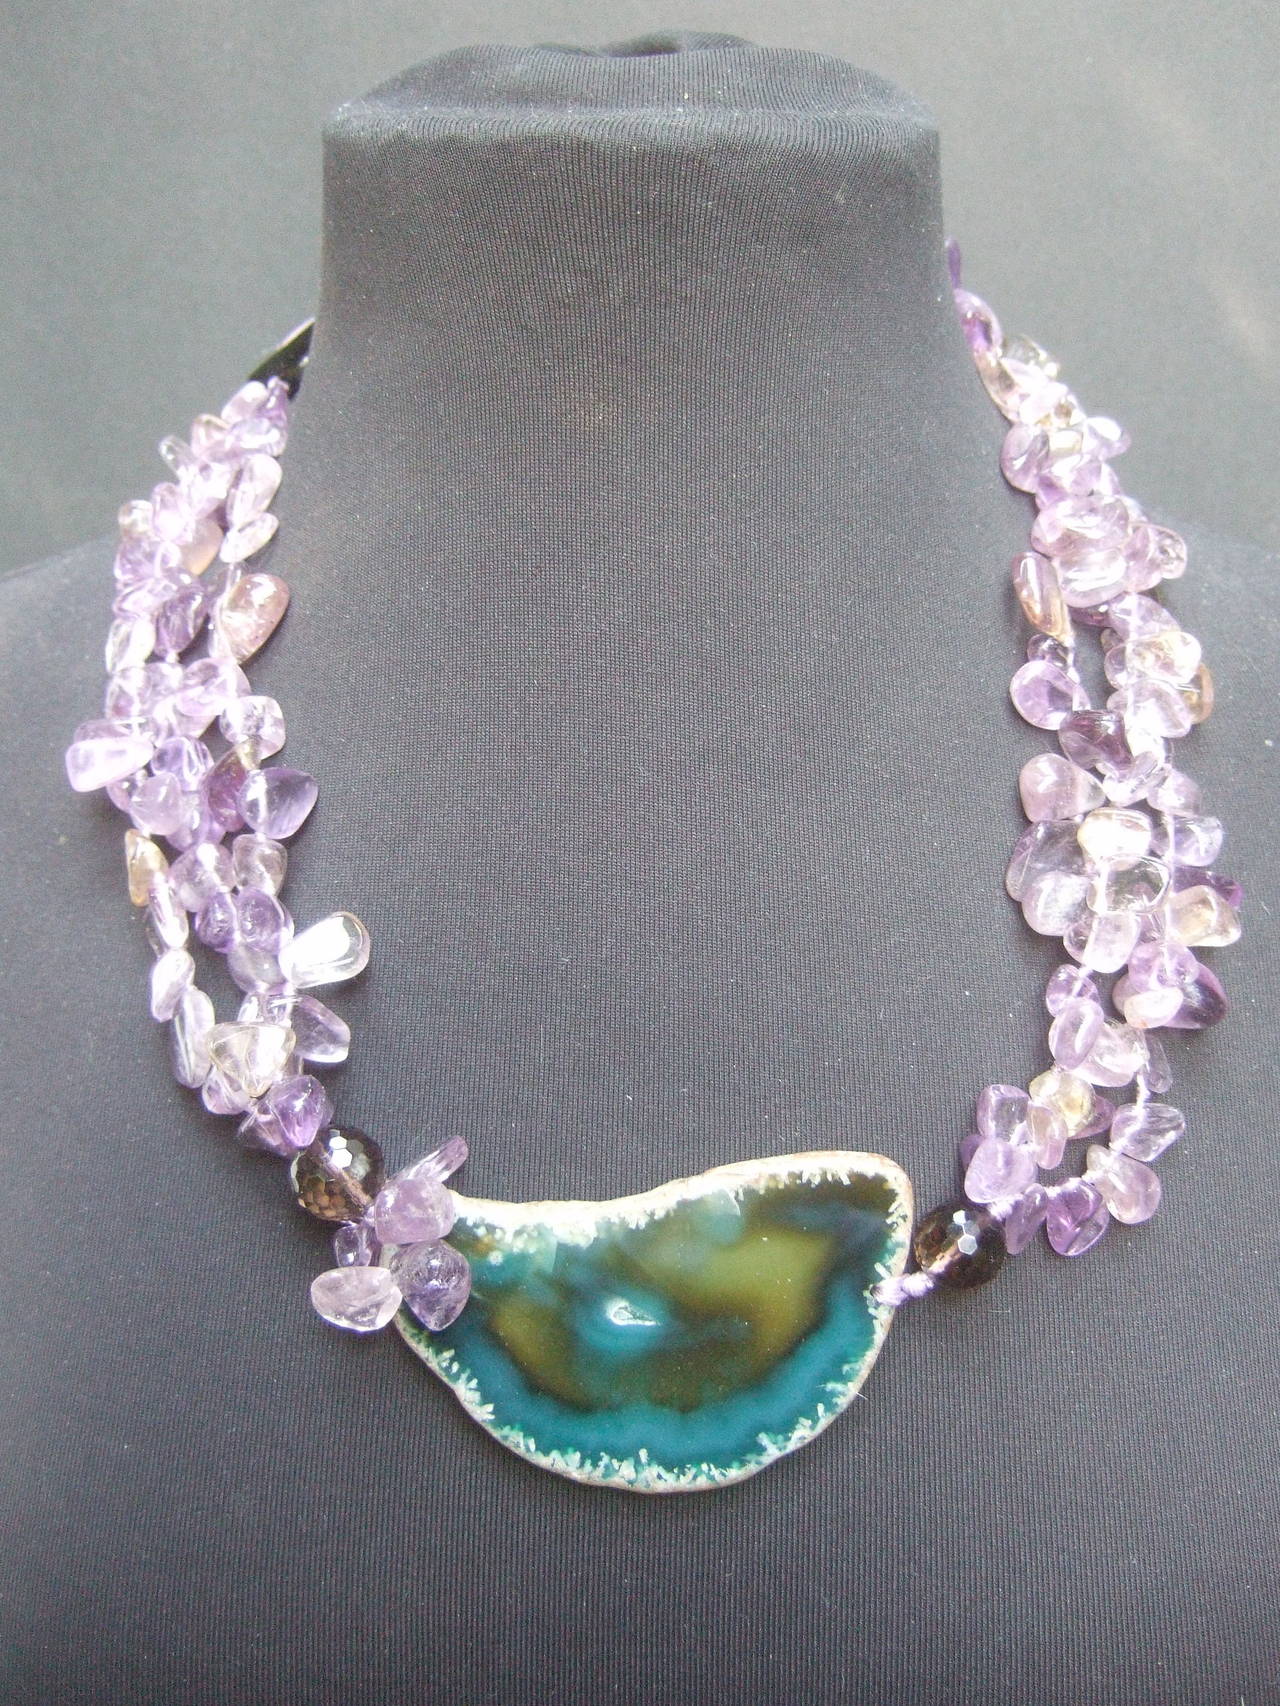 Exotic amethyst sliced agate artisan necklace
The unique handmade necklace is designed with a 
large green sliced agate pendant

The large polished sliced agate is combined with three
strands of translucent polished amethyst rocks 
Each side